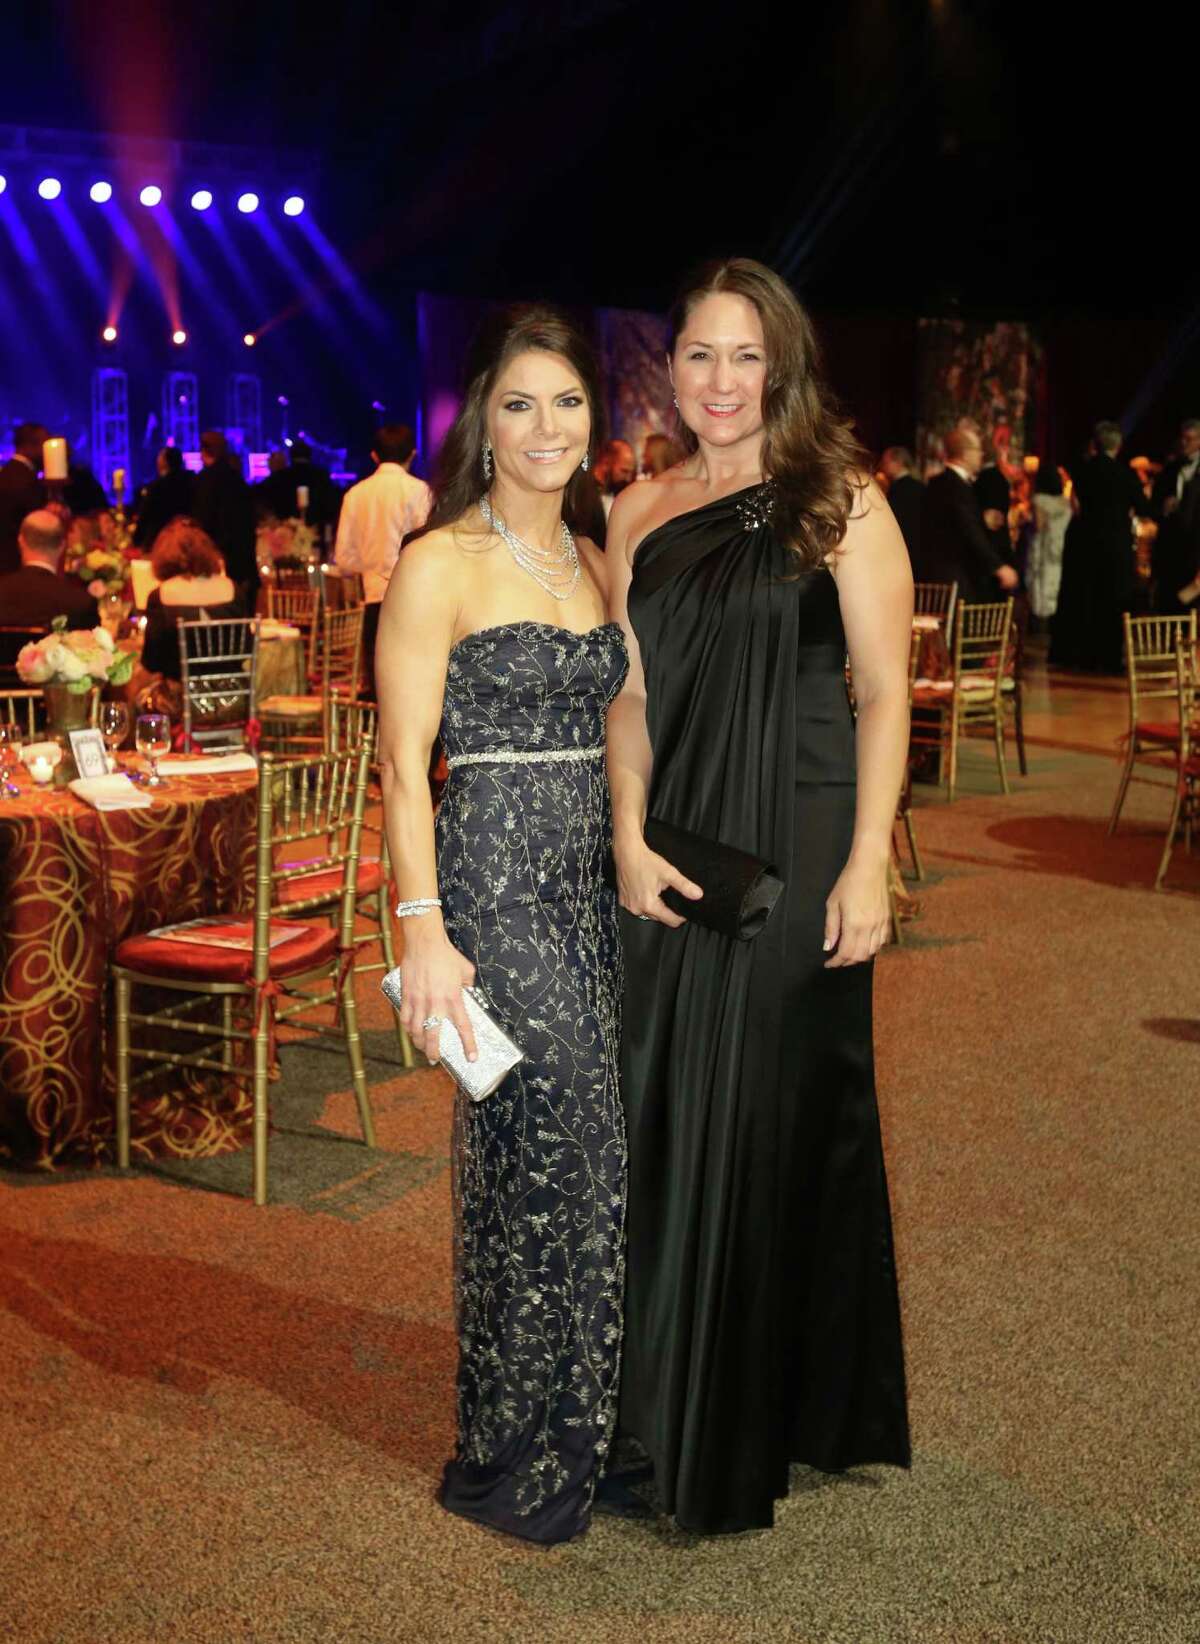 Monica Hartland and Julie Pitts at the 2015 Alley Theatre Ball at NRG Stadium.